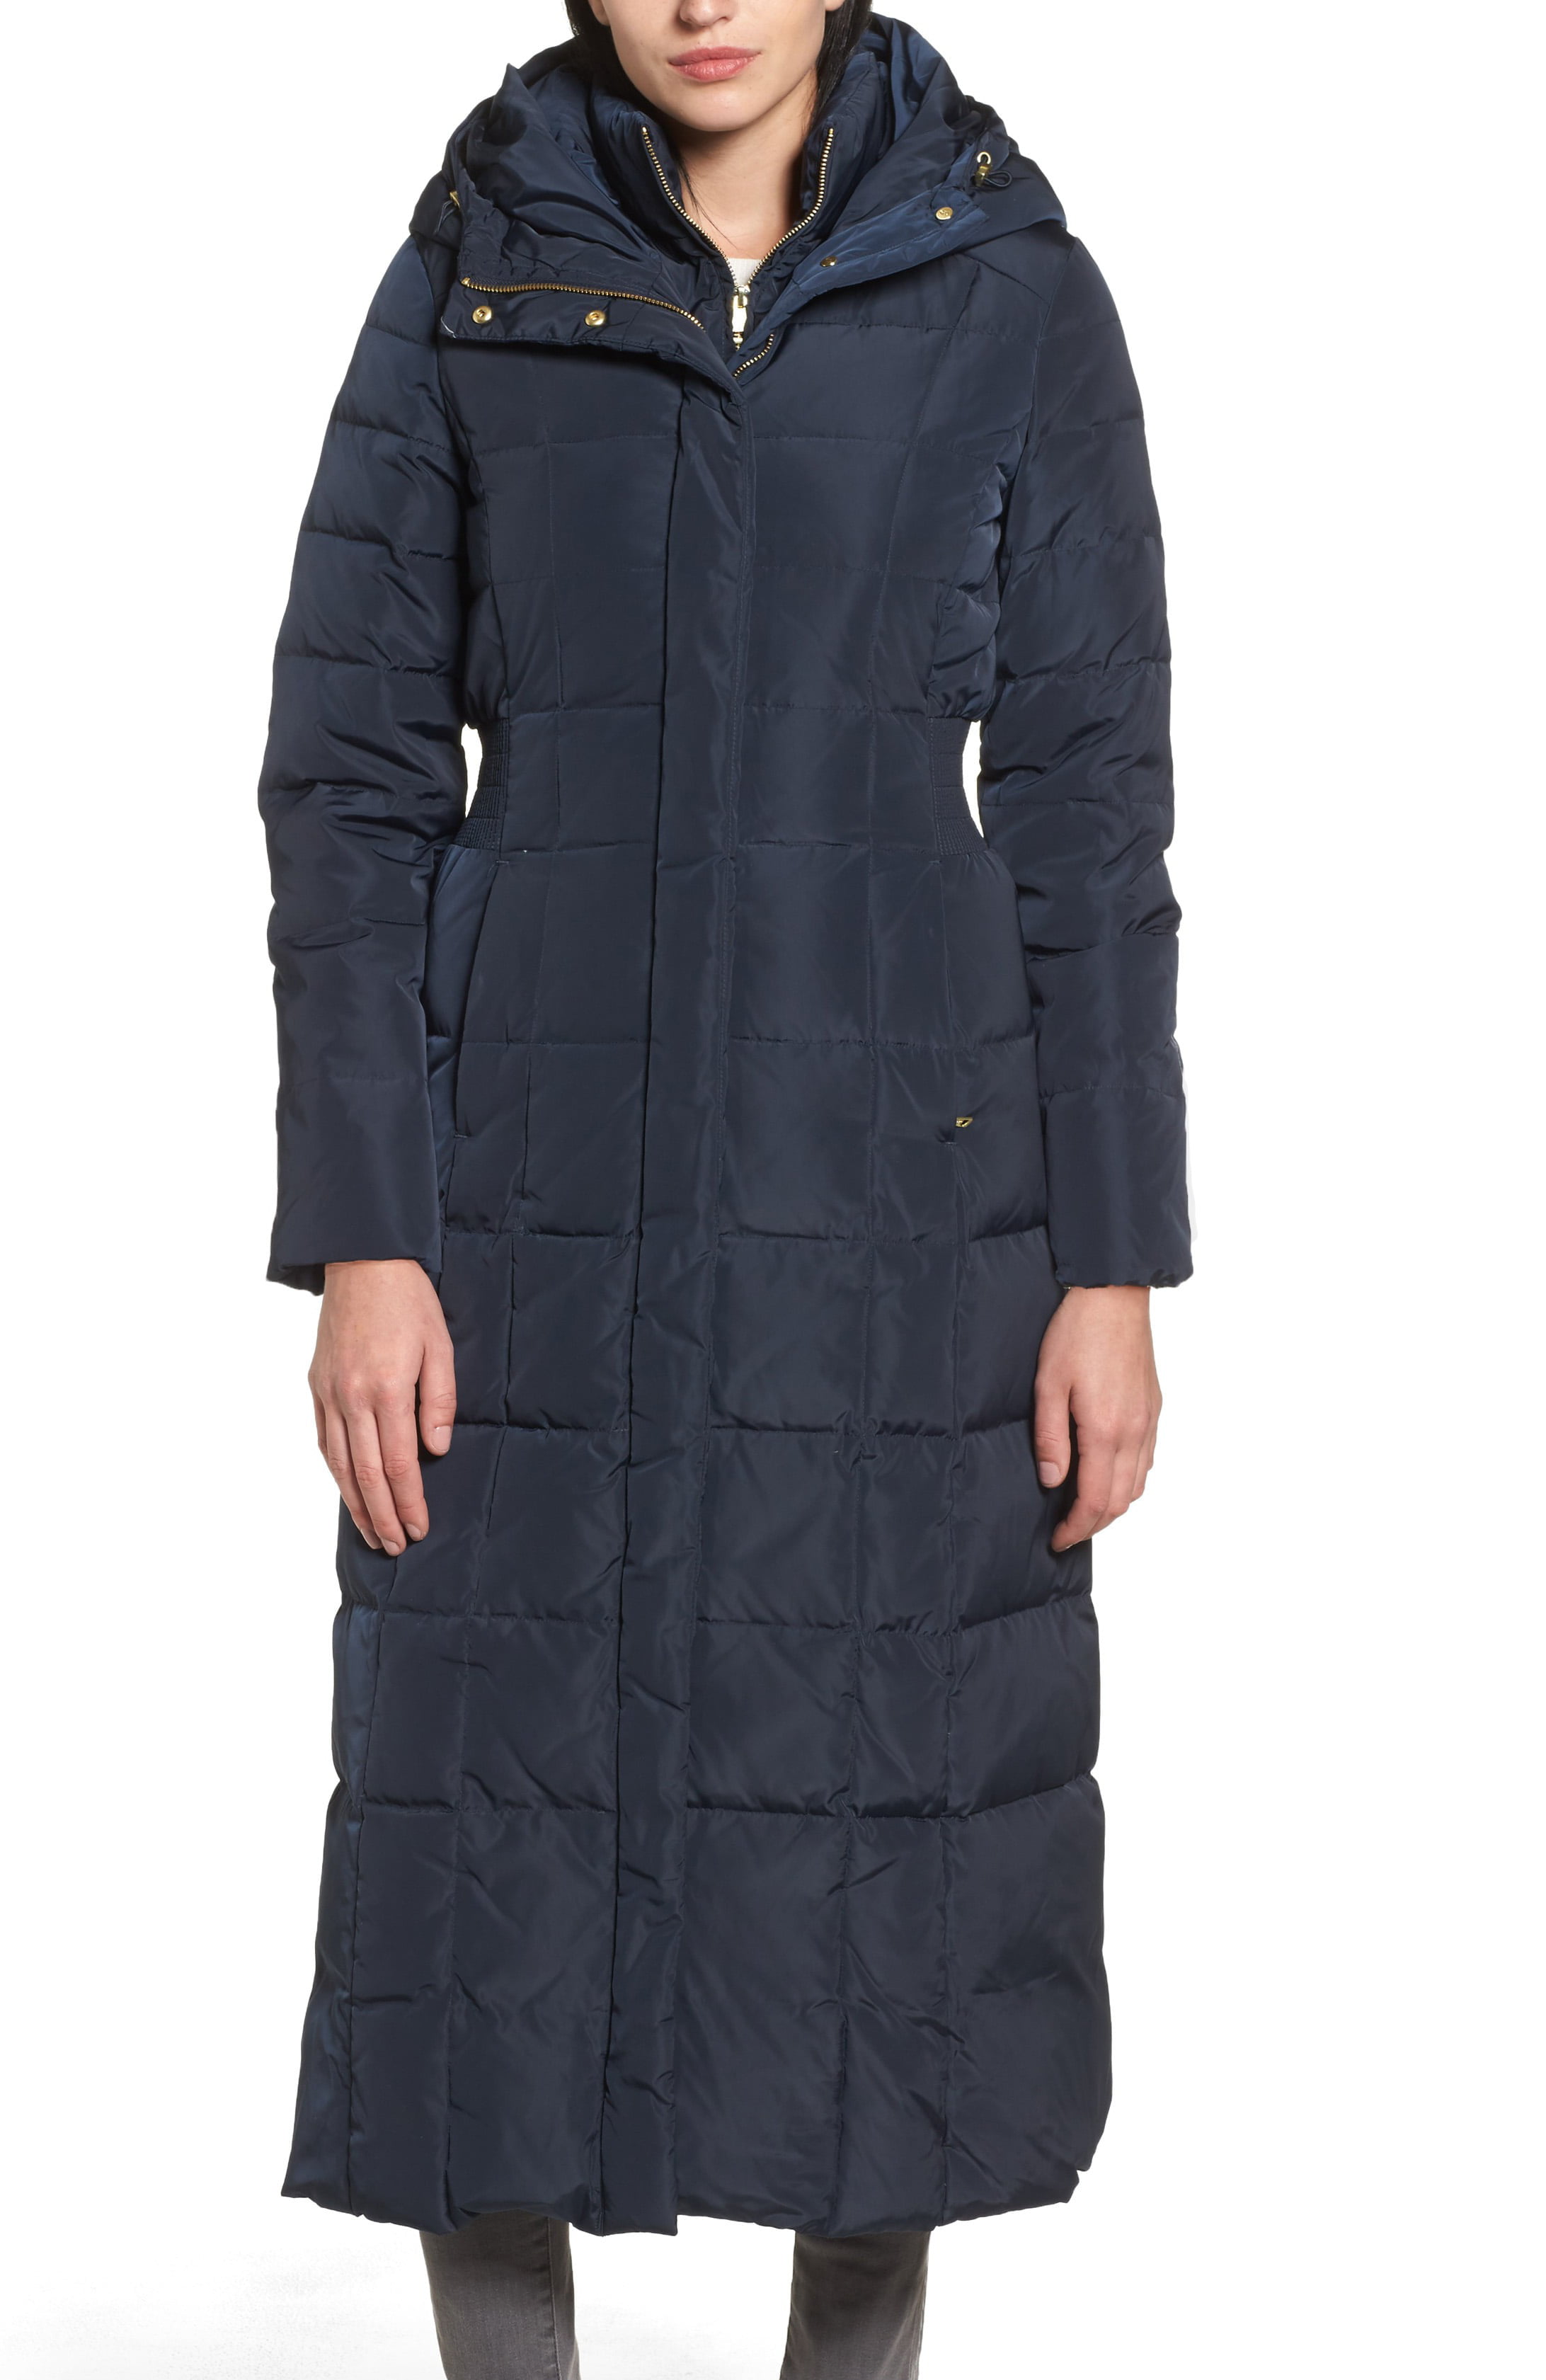 Cole Haan Coats & Jackets - Womens Coat Navy Small Quilted Long Down